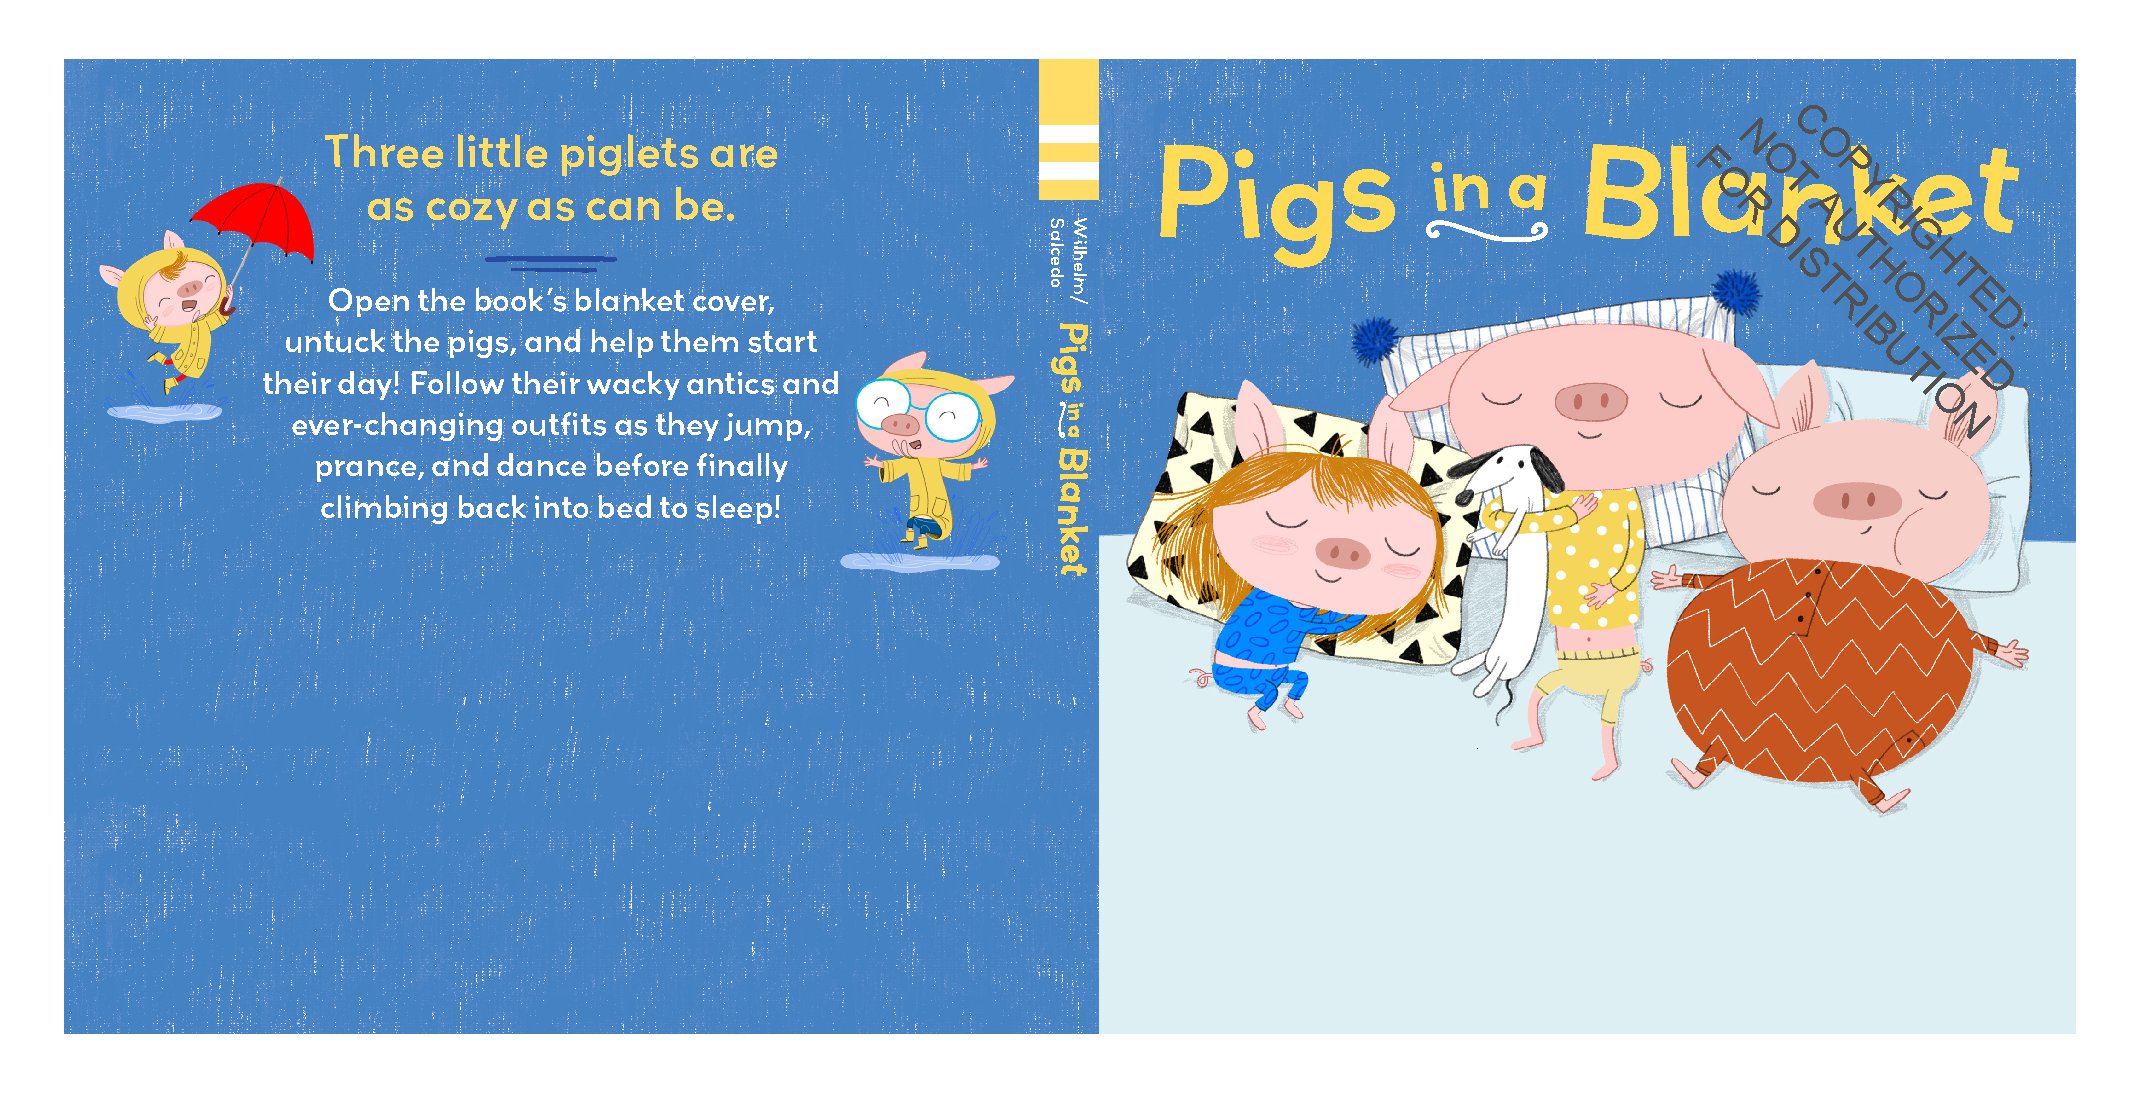 Pigs in a Blanket (Board Books for Toddlers, Bedtime Stories, Goodnight Board Book)